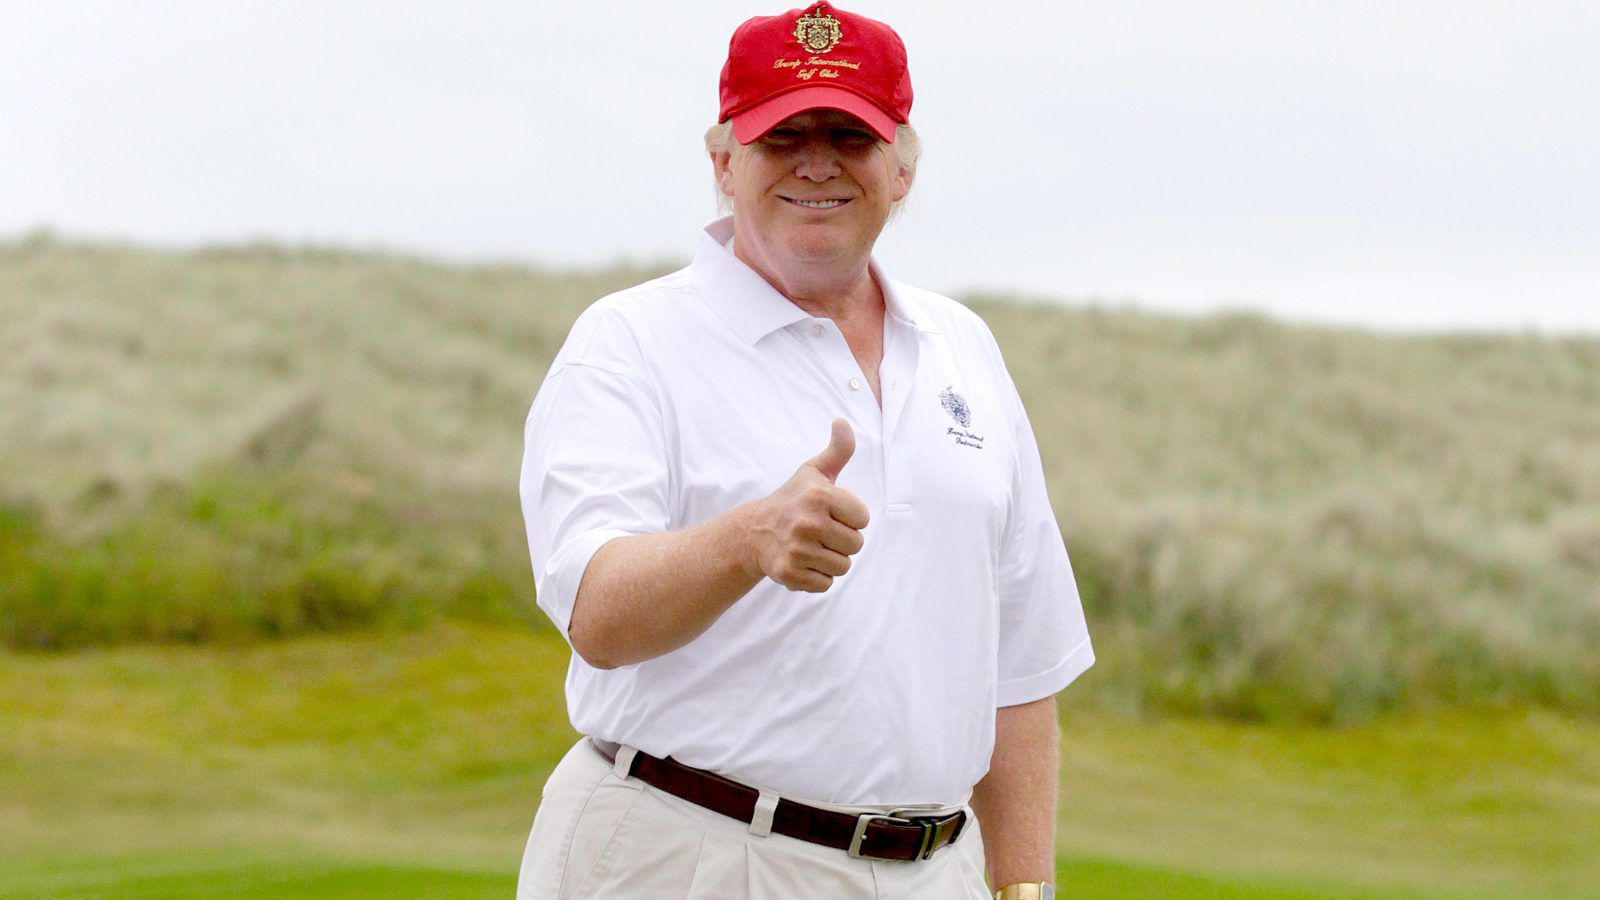 Donald Trump Hits Hillary Clinton In The Head With A Golf Ball